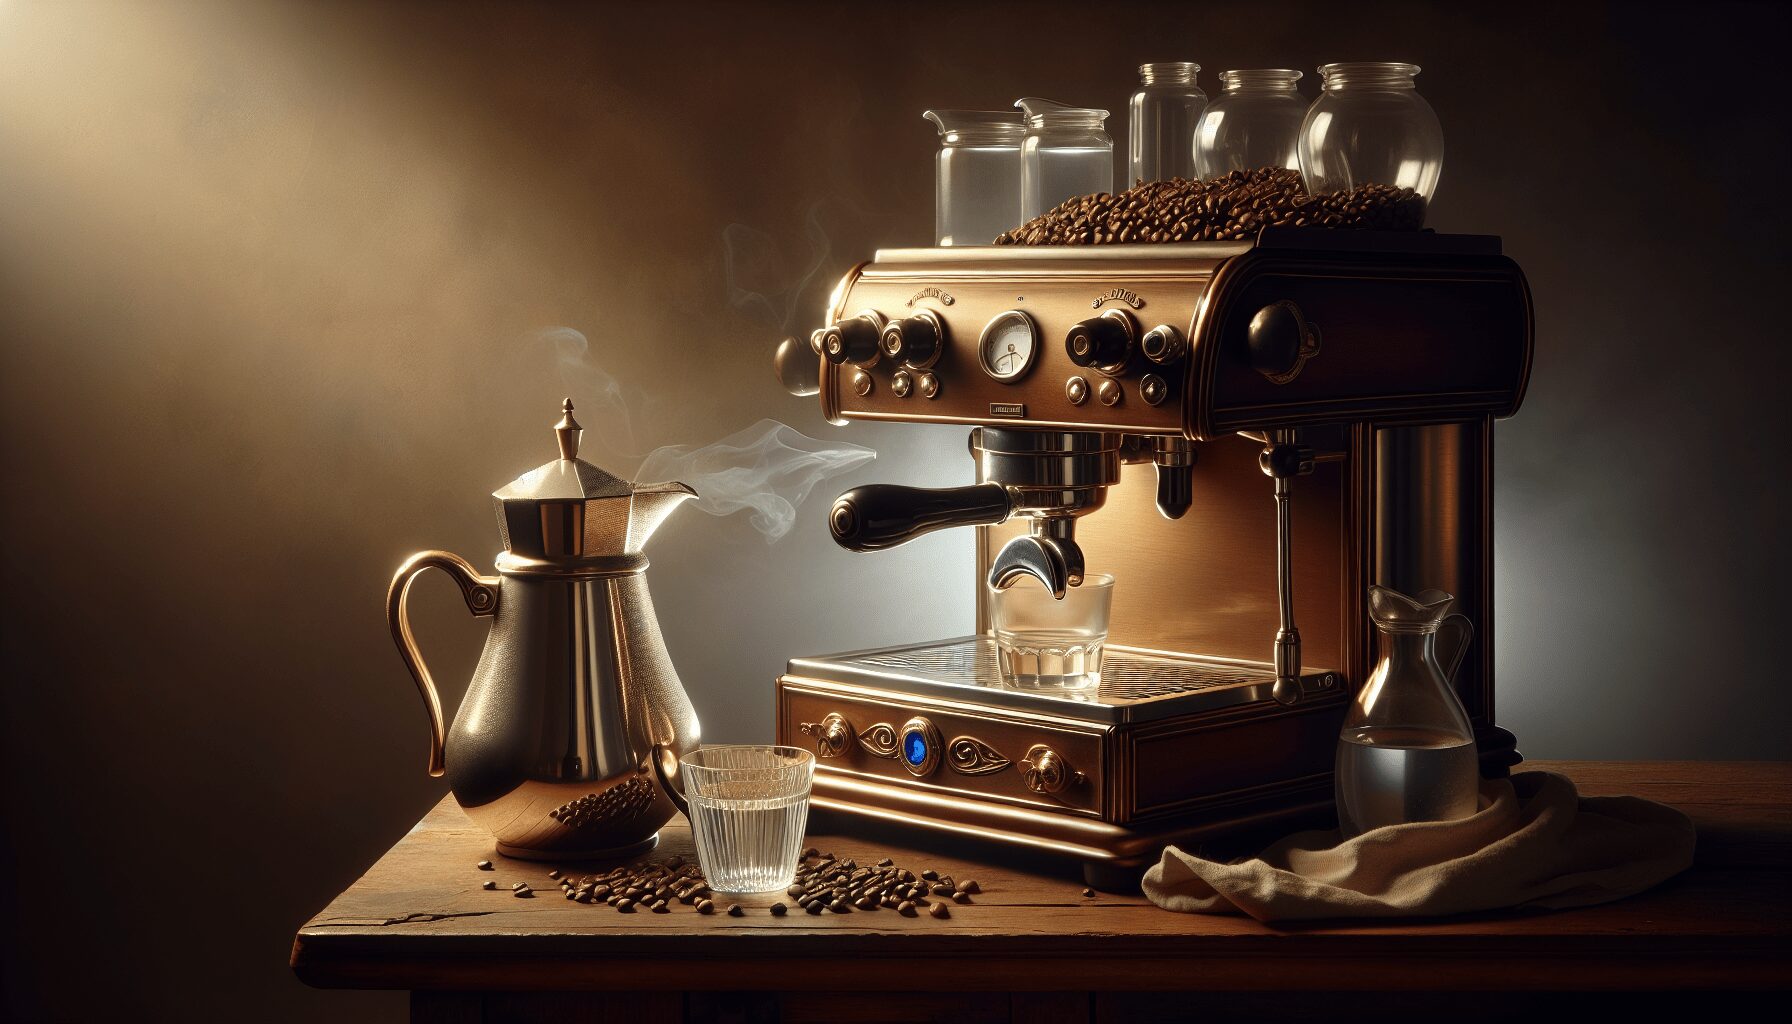 Why Distilled Water is Essential for Your Espresso Machine